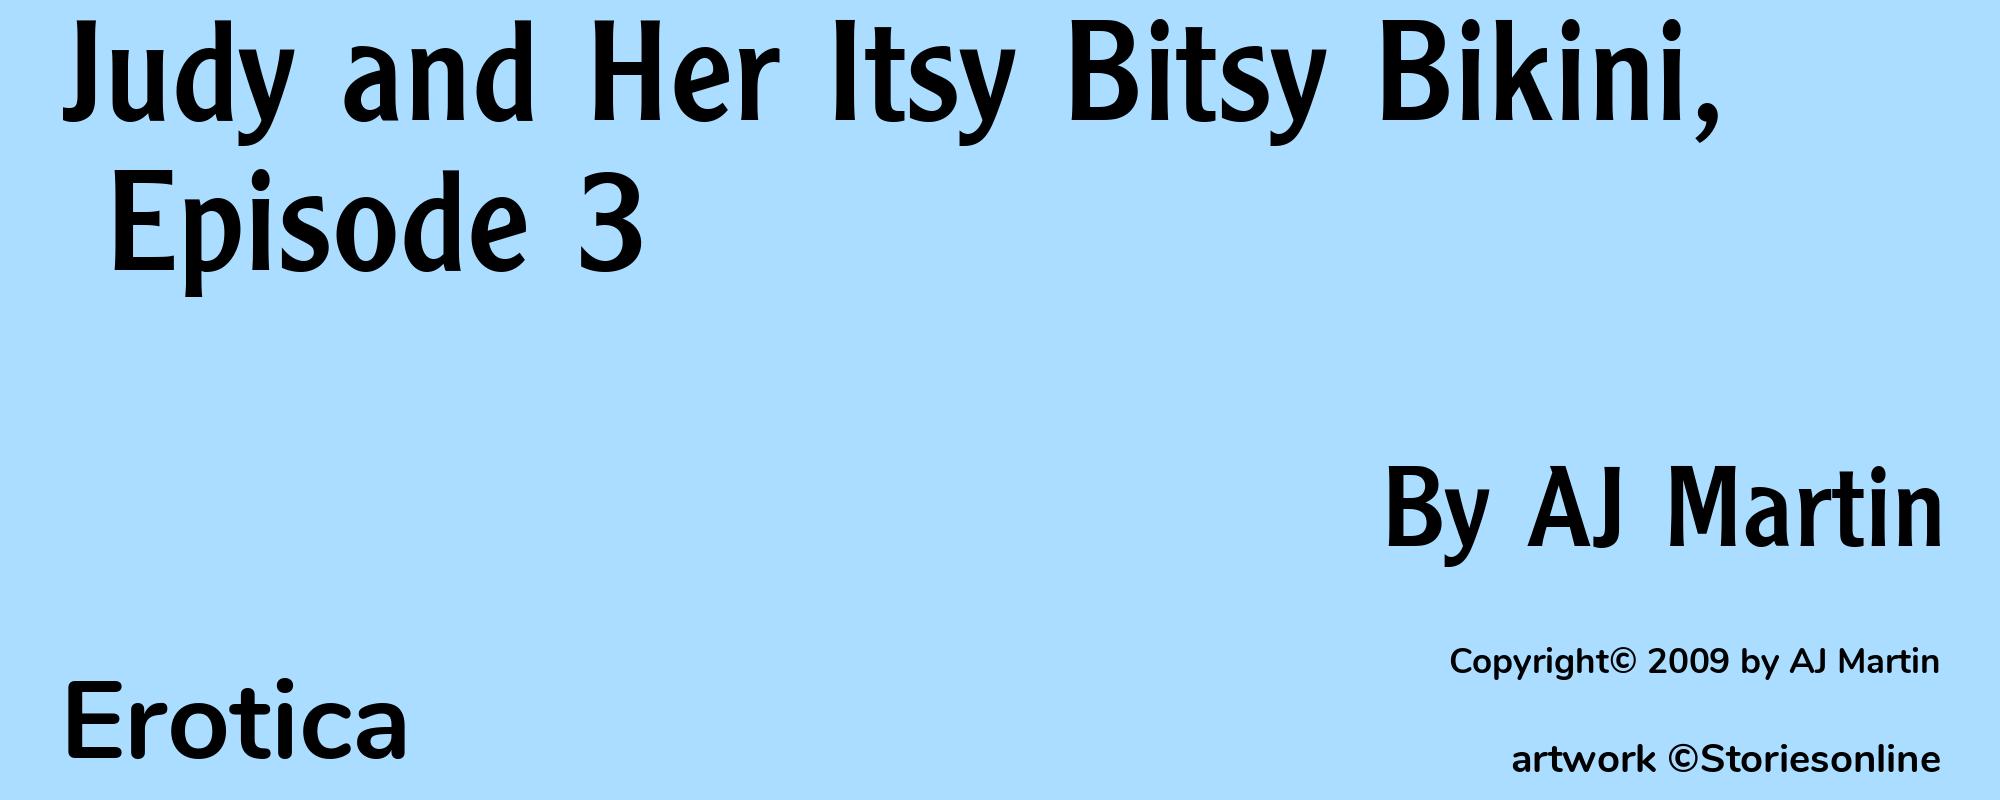 Judy and Her Itsy Bitsy Bikini, Episode 3 - Cover